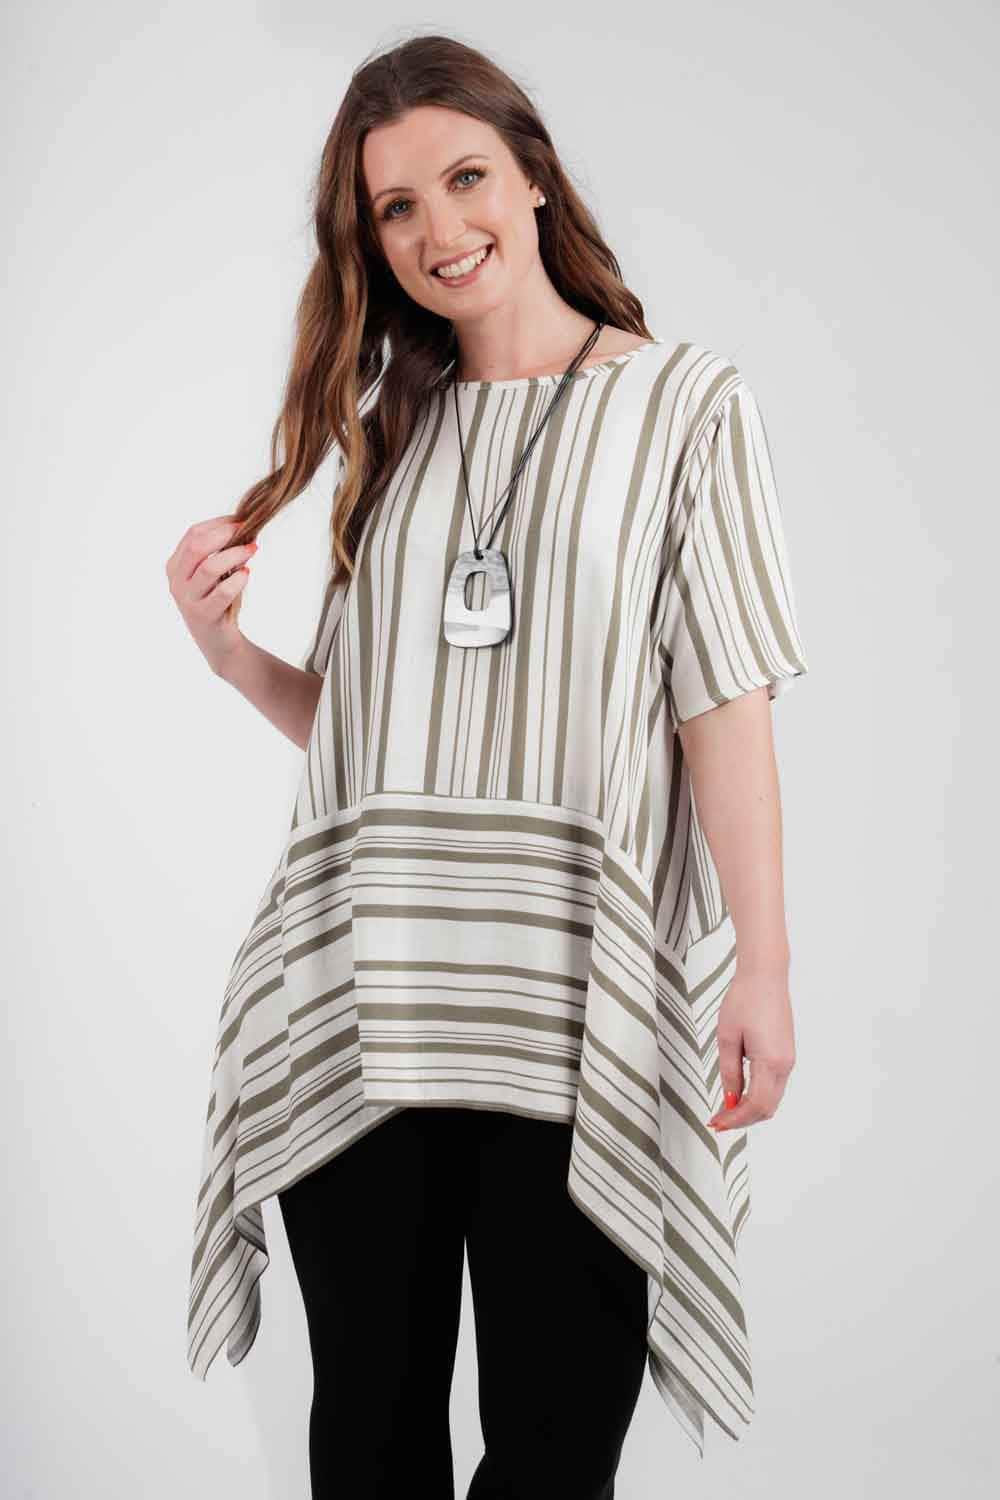 Saloos Top 12 / Khaki Long A-Line Striped Top with Necklace